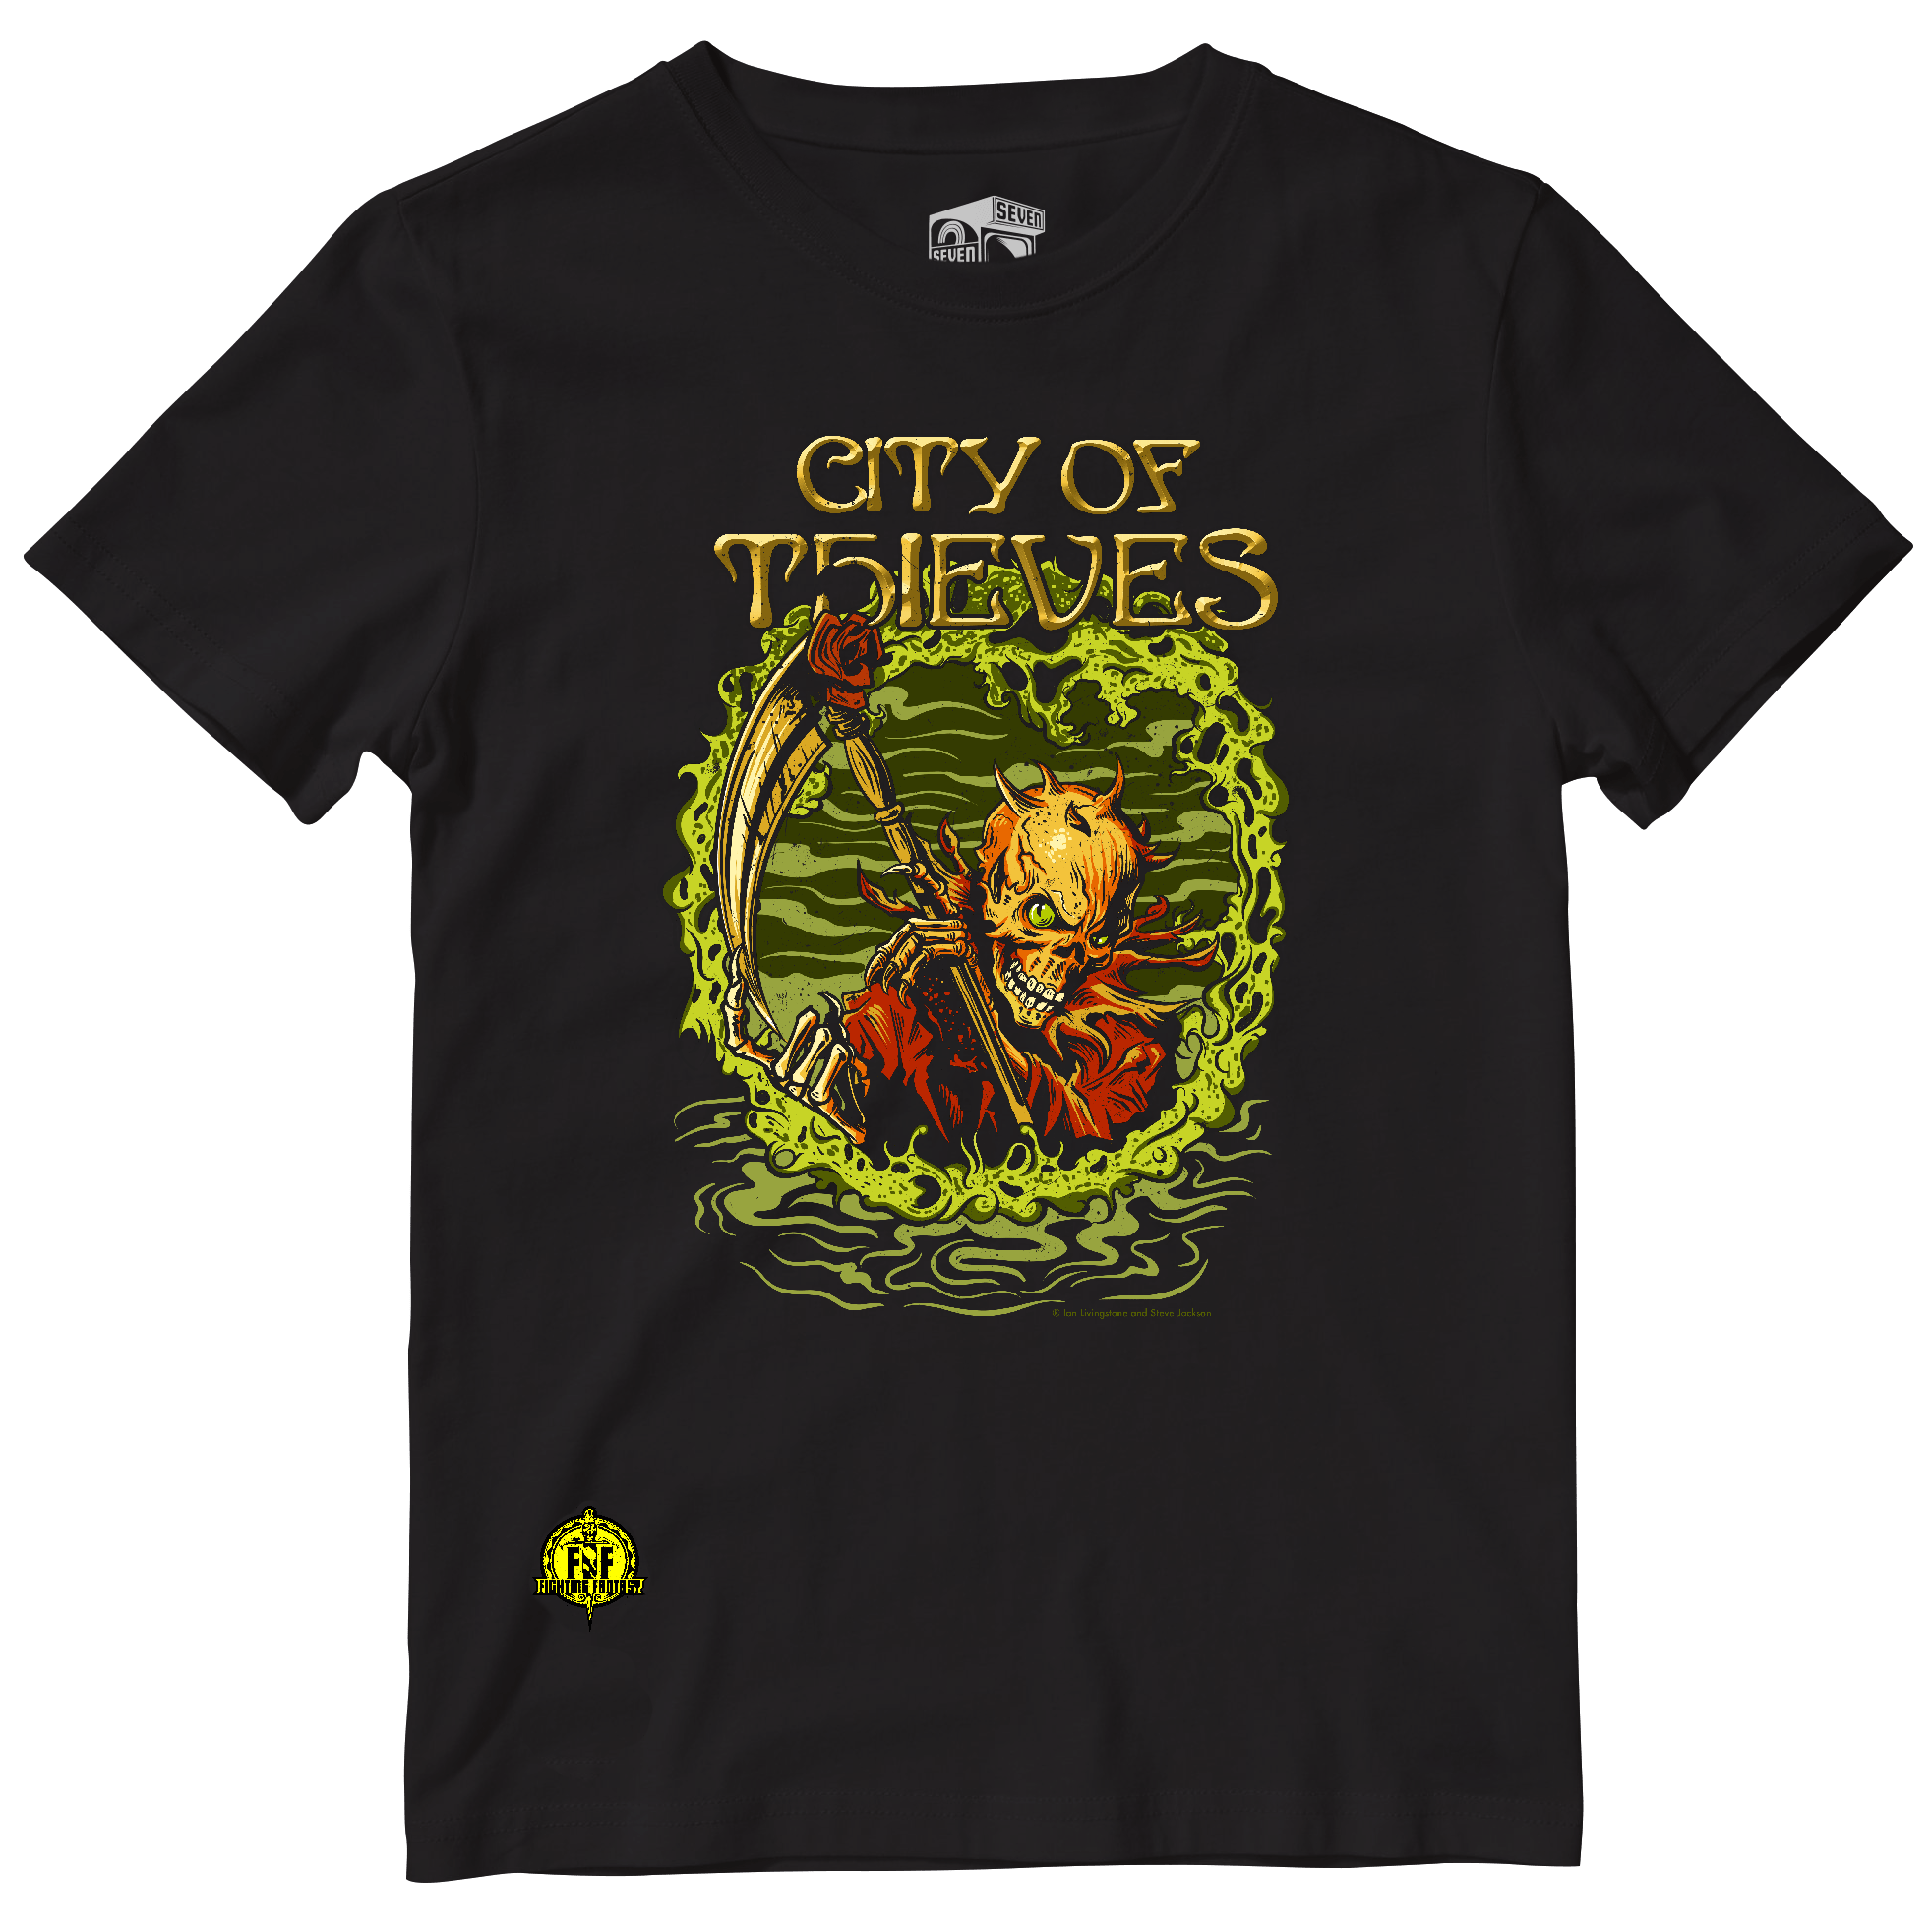 City of Thieves t-shirt